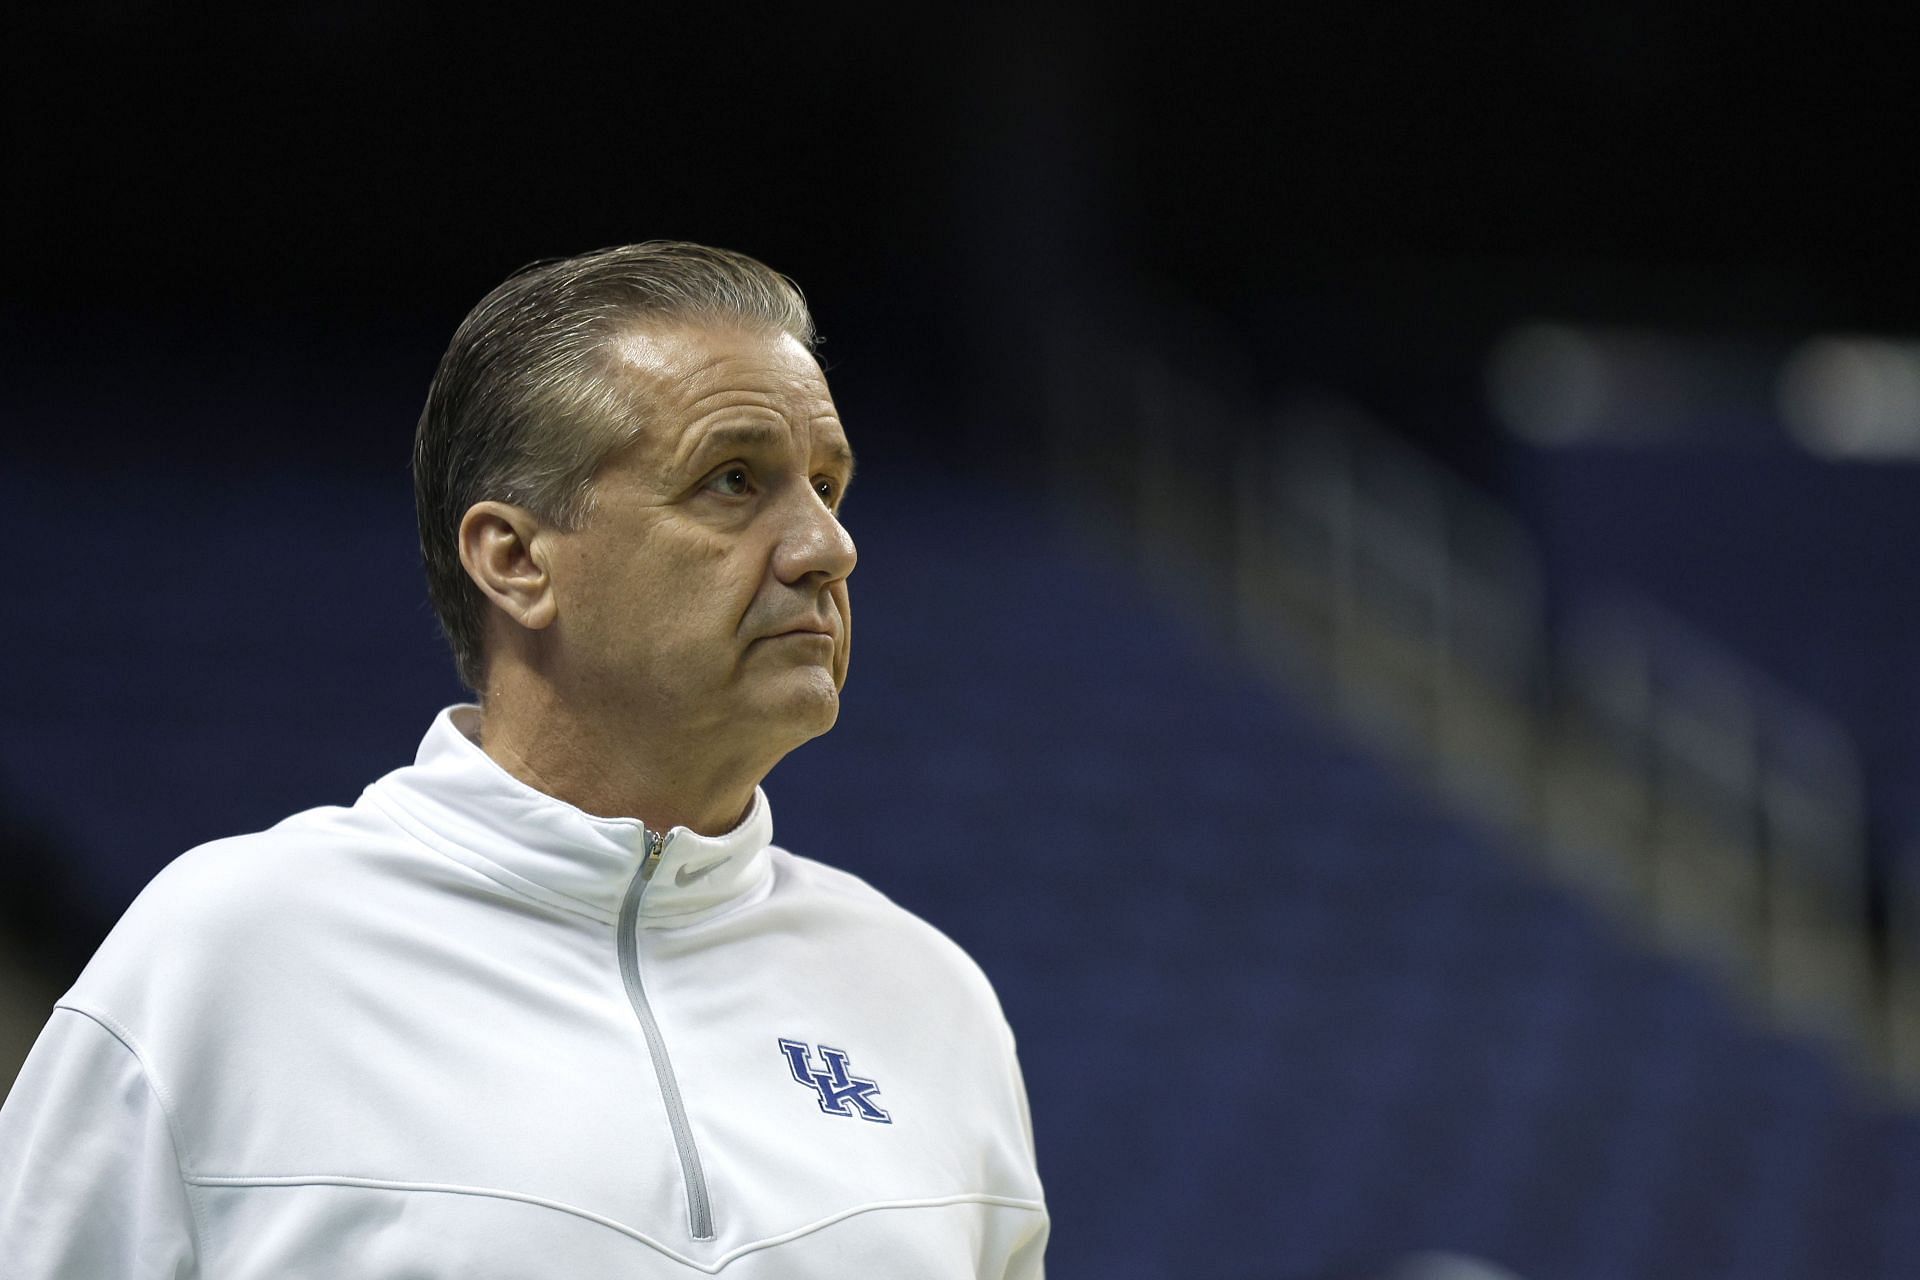 John Calipari hopes to get the Wildcats back into championship form next year.